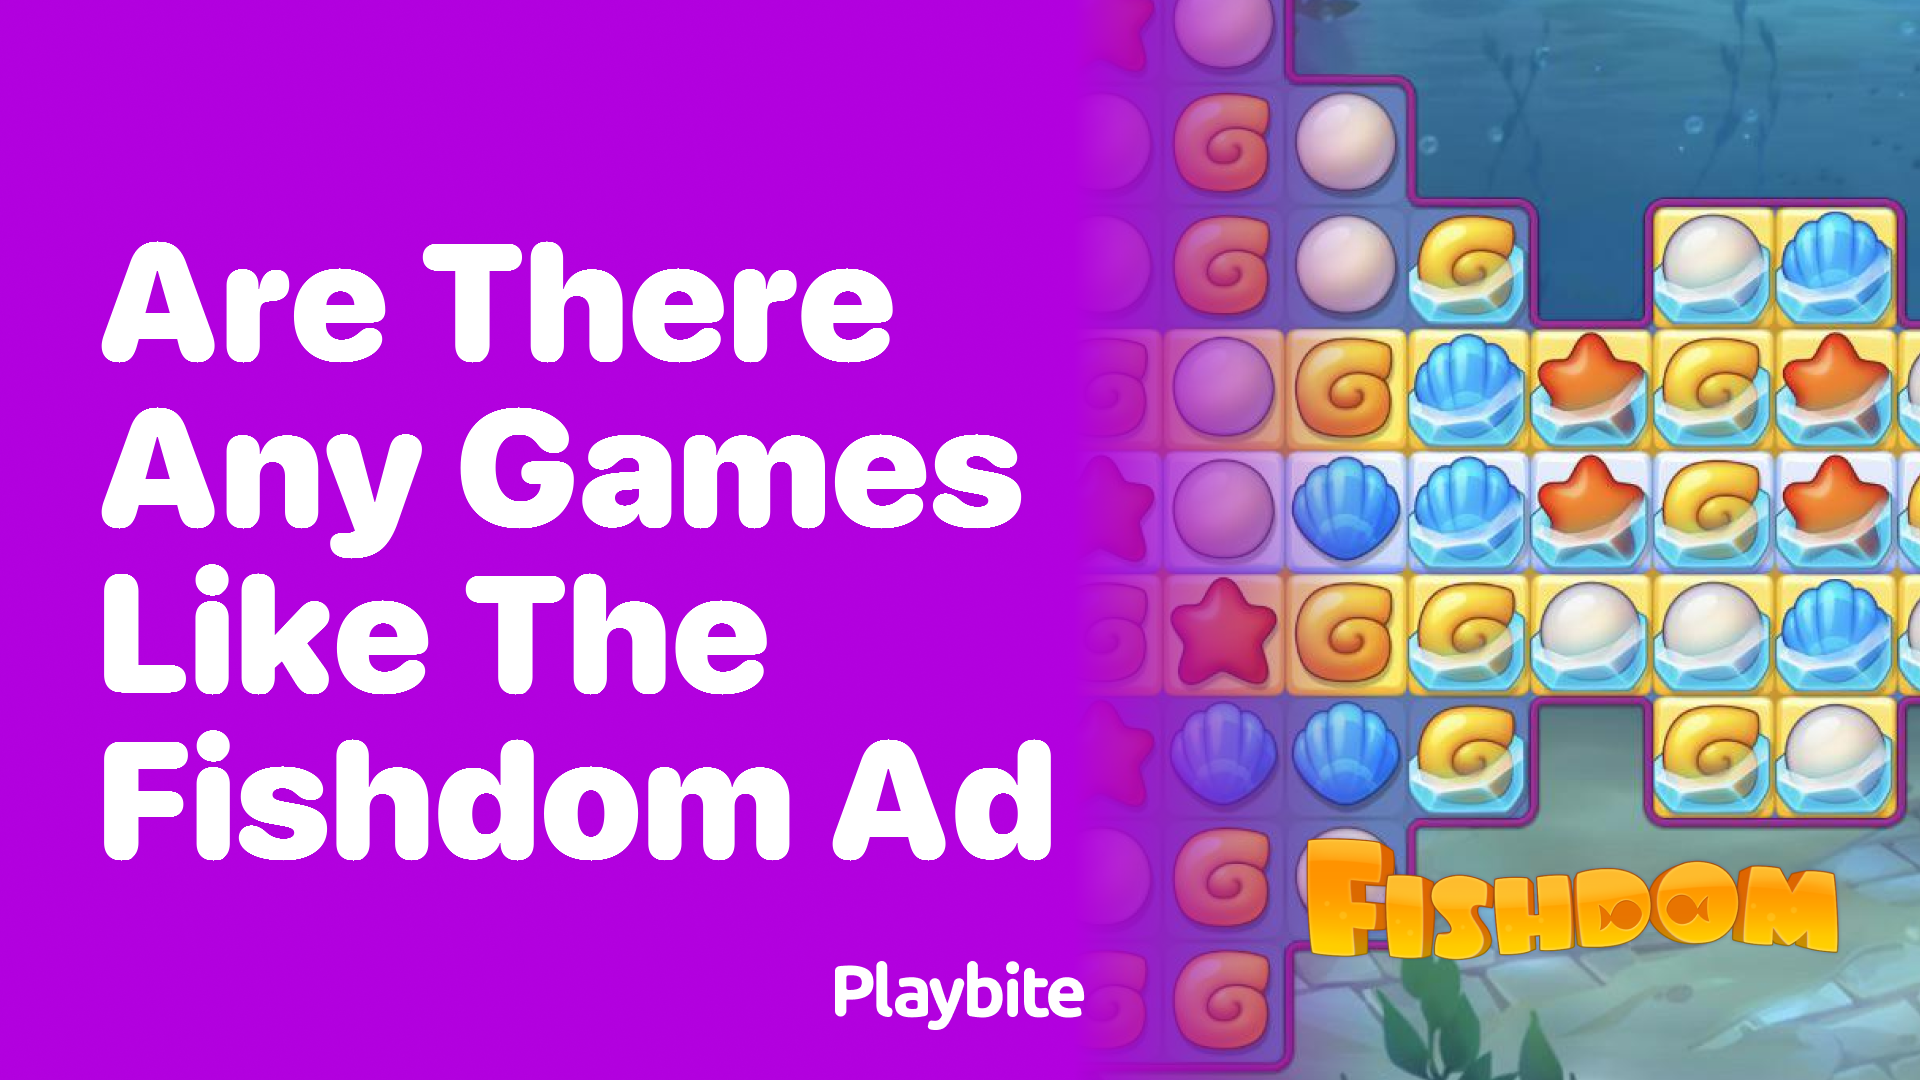 Are There Any Games Like the Fishdom Ad?